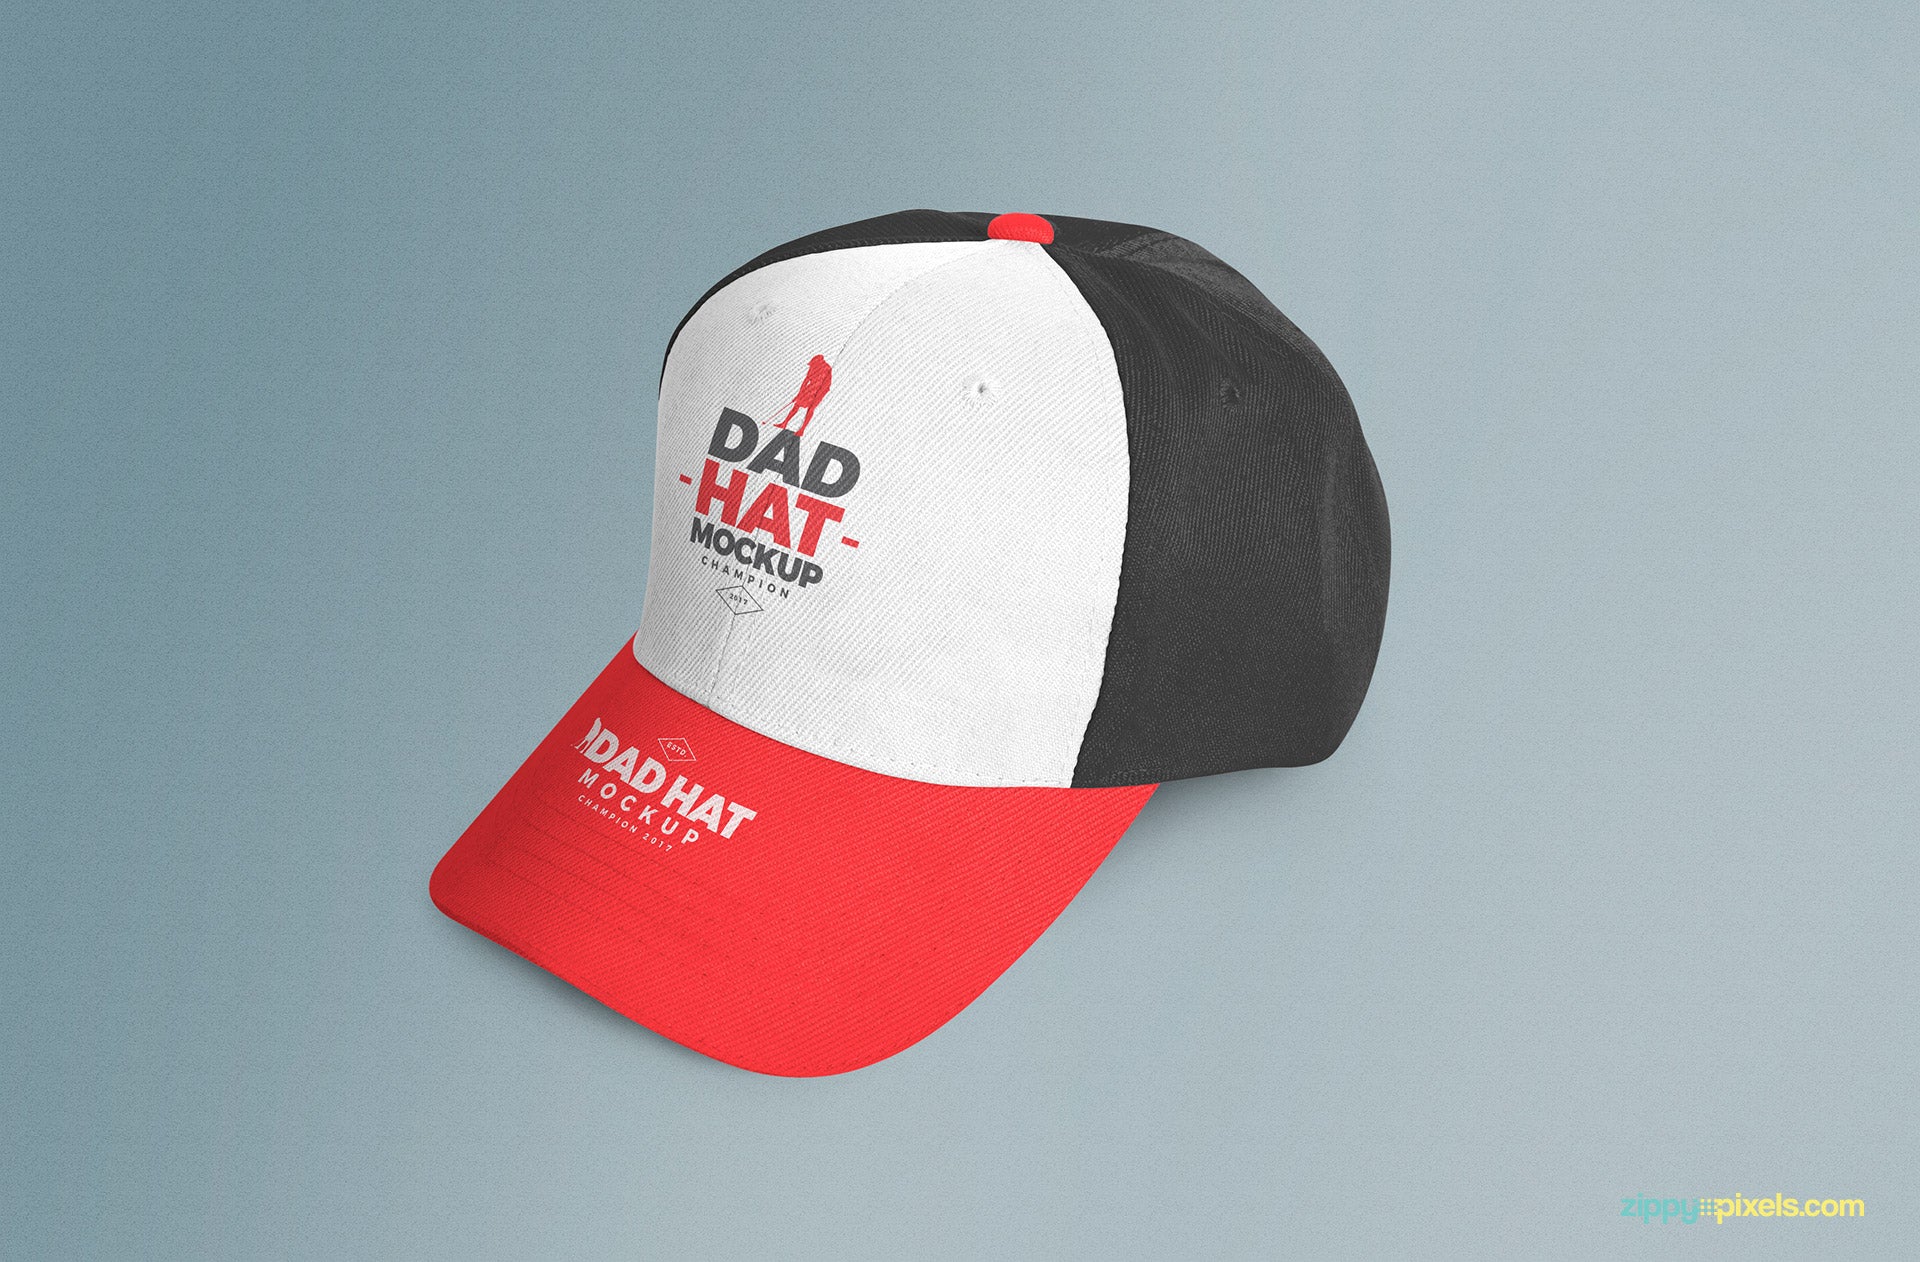 Download Free Customizable Dad Hat and Cap Mockup PSD - CreativeBooster